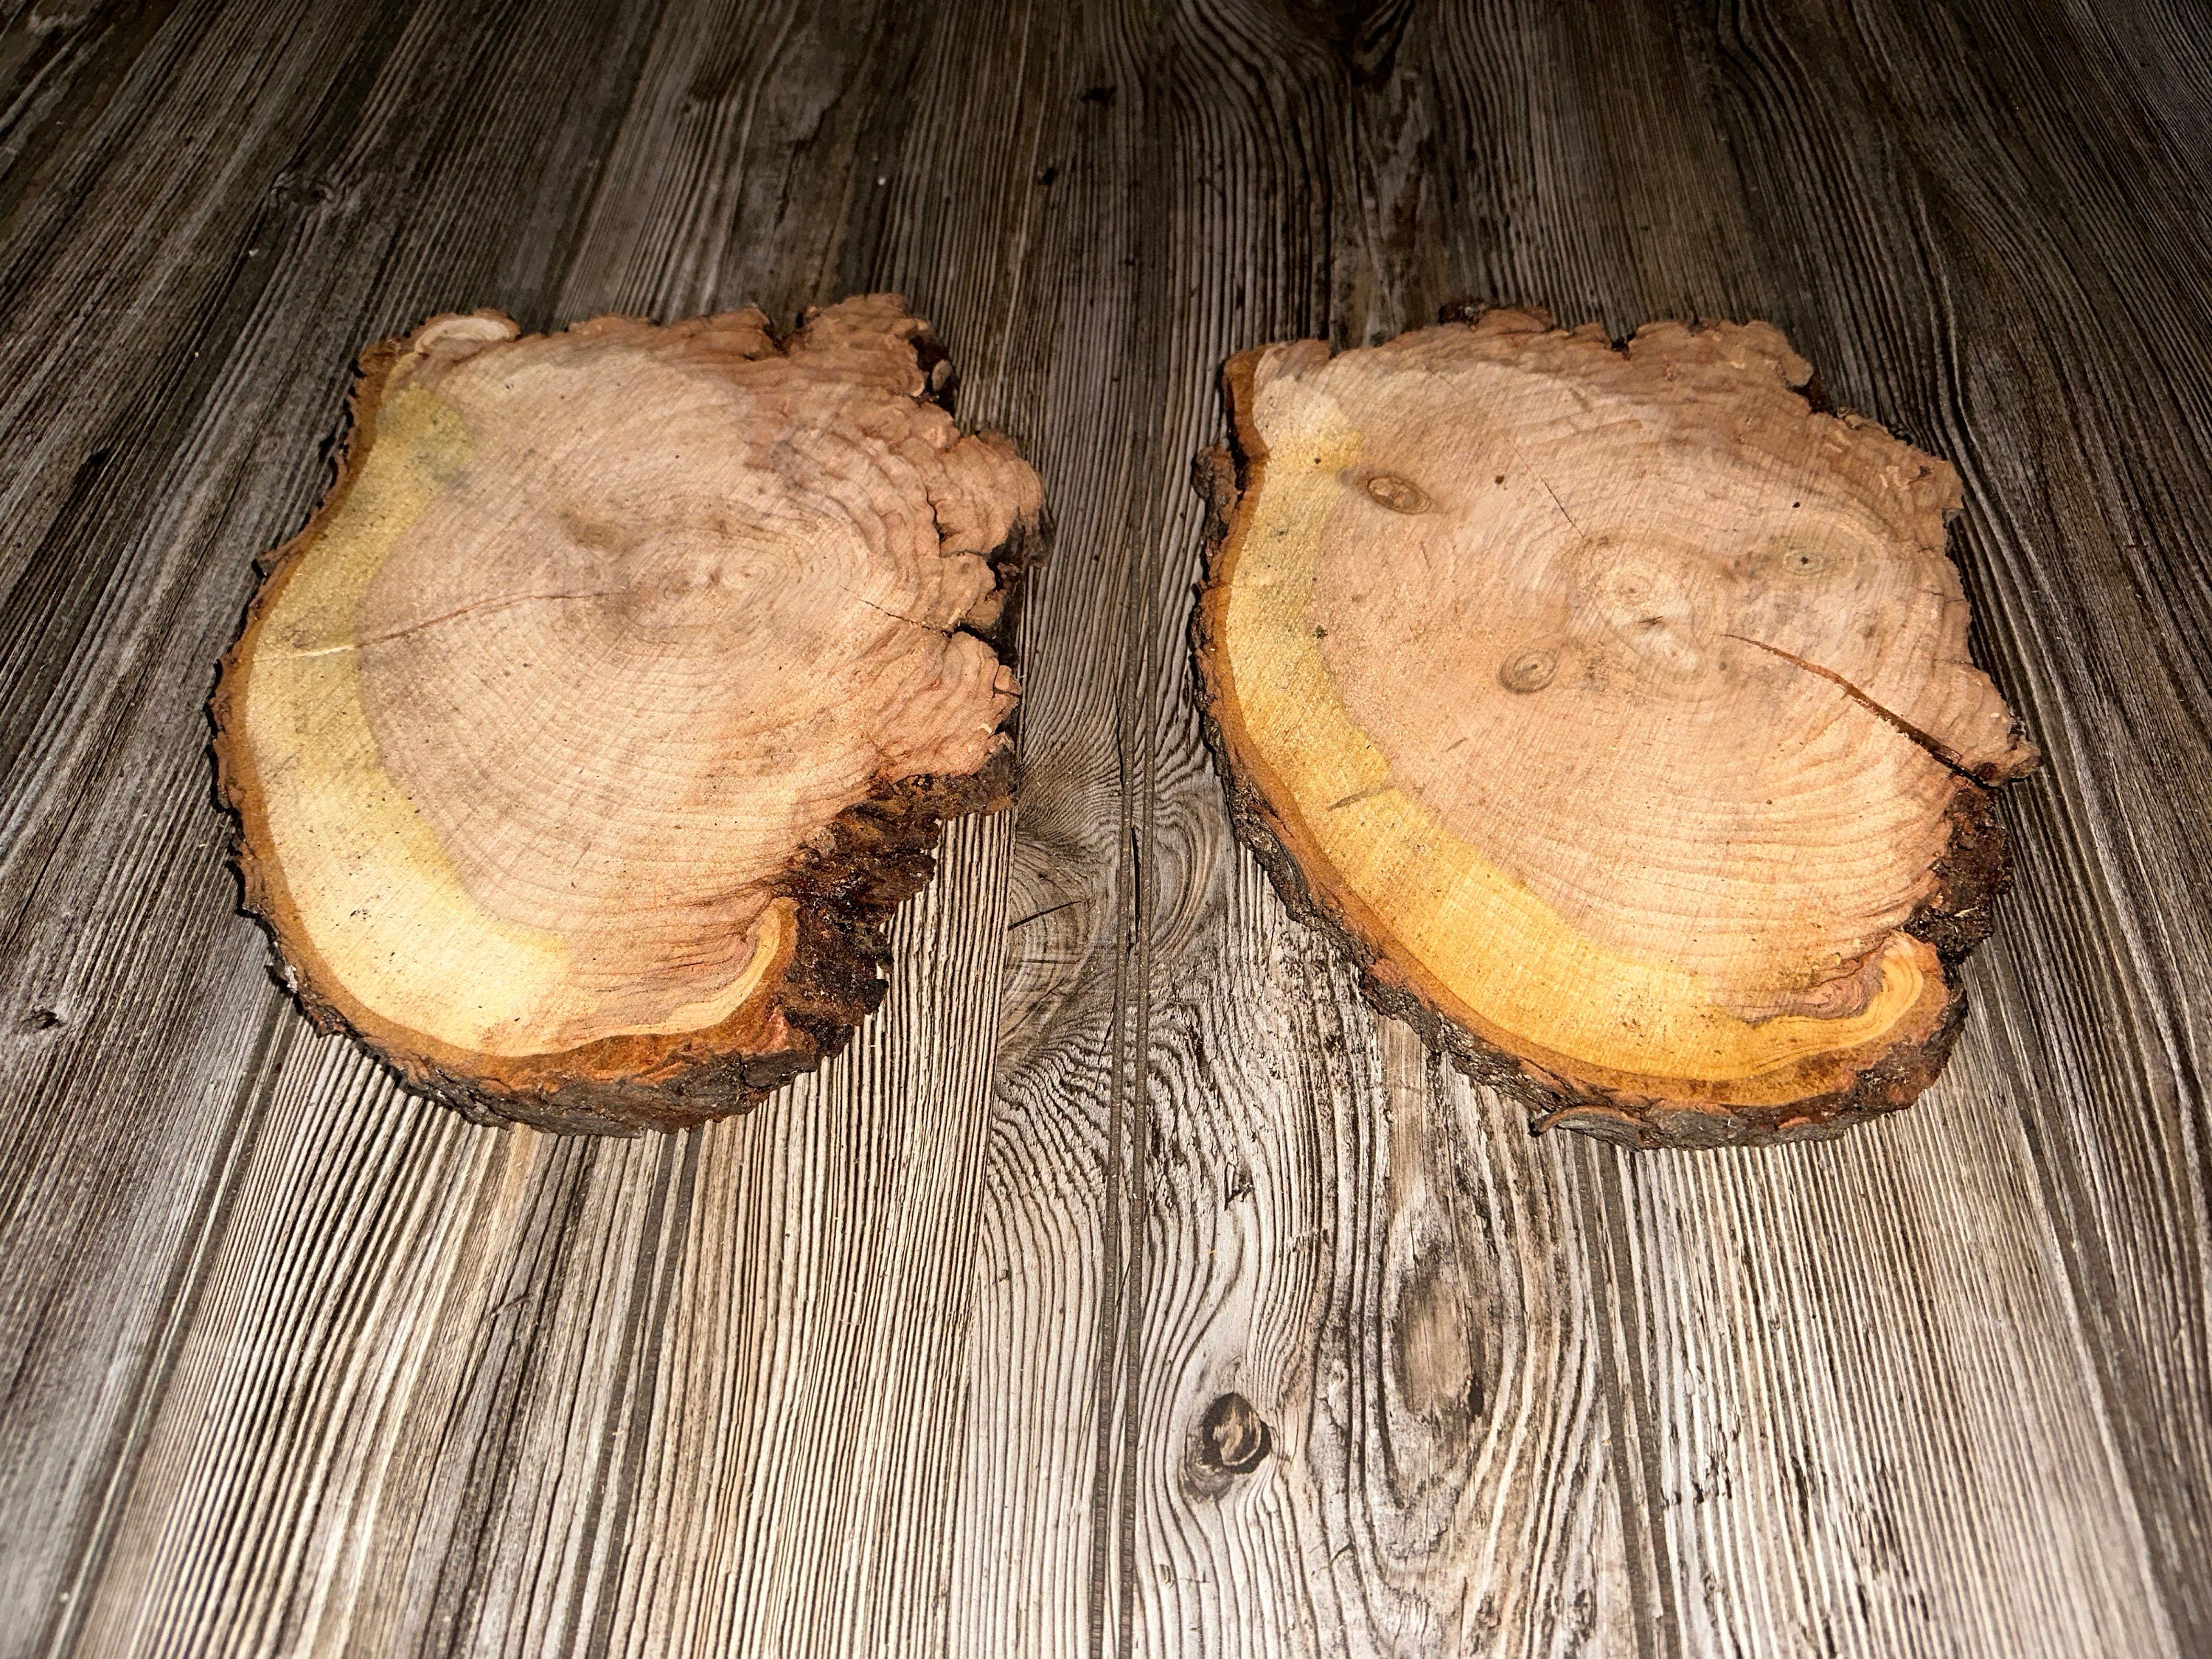 Two Cherry Burl Slices, Approximately 10.5 Inches Long by 8 Inches Wide and 1 Inch Thick